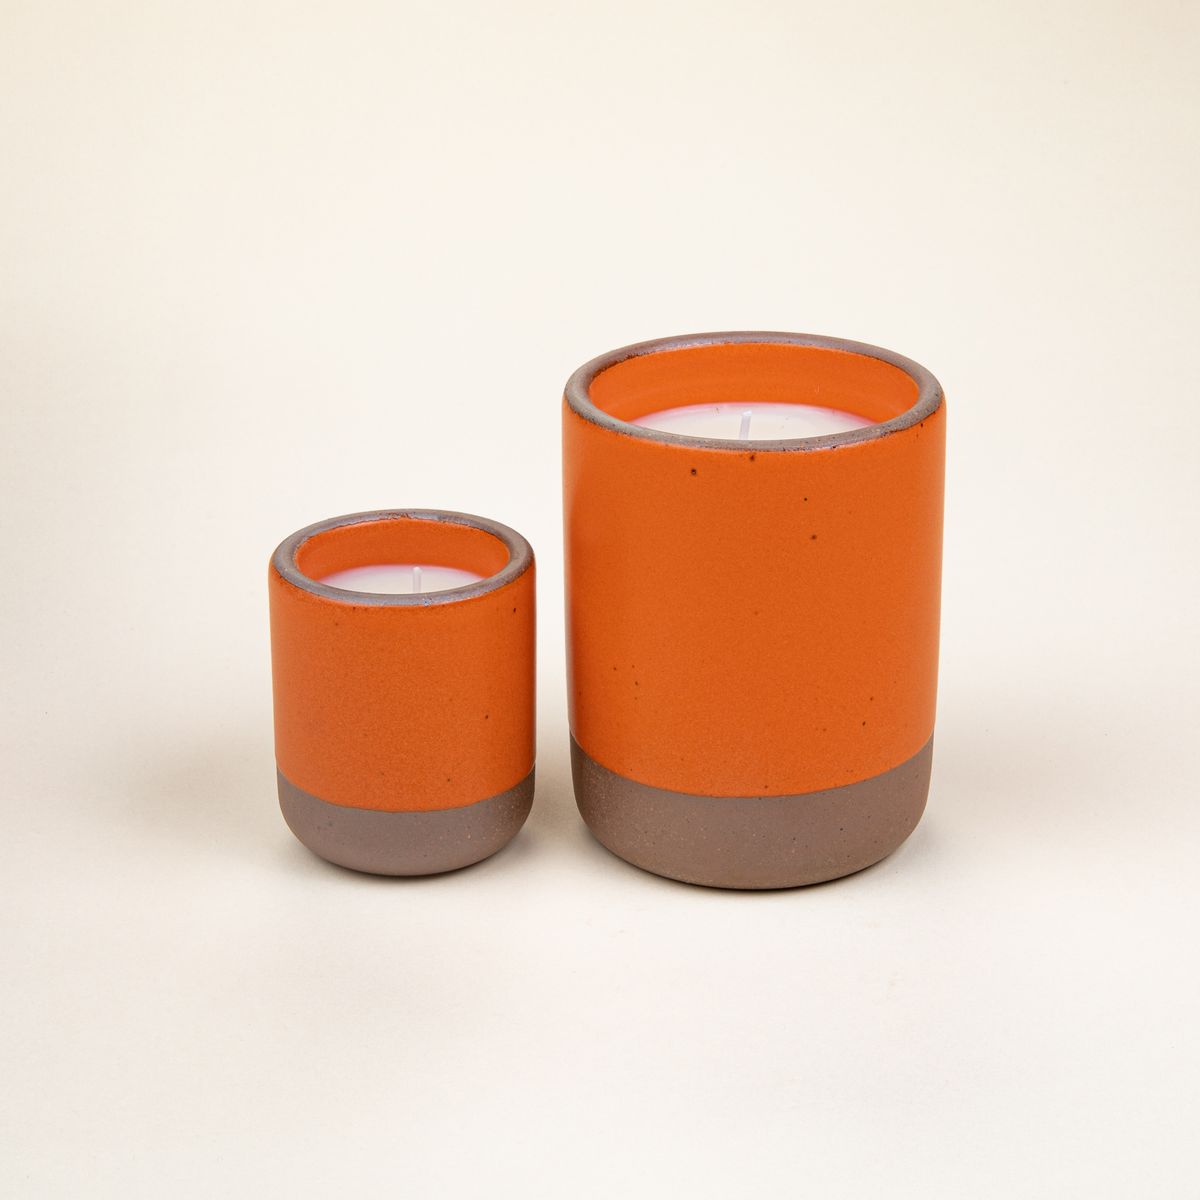 Small and large ceramic vessels in a bold orange color with poured candles inside each.